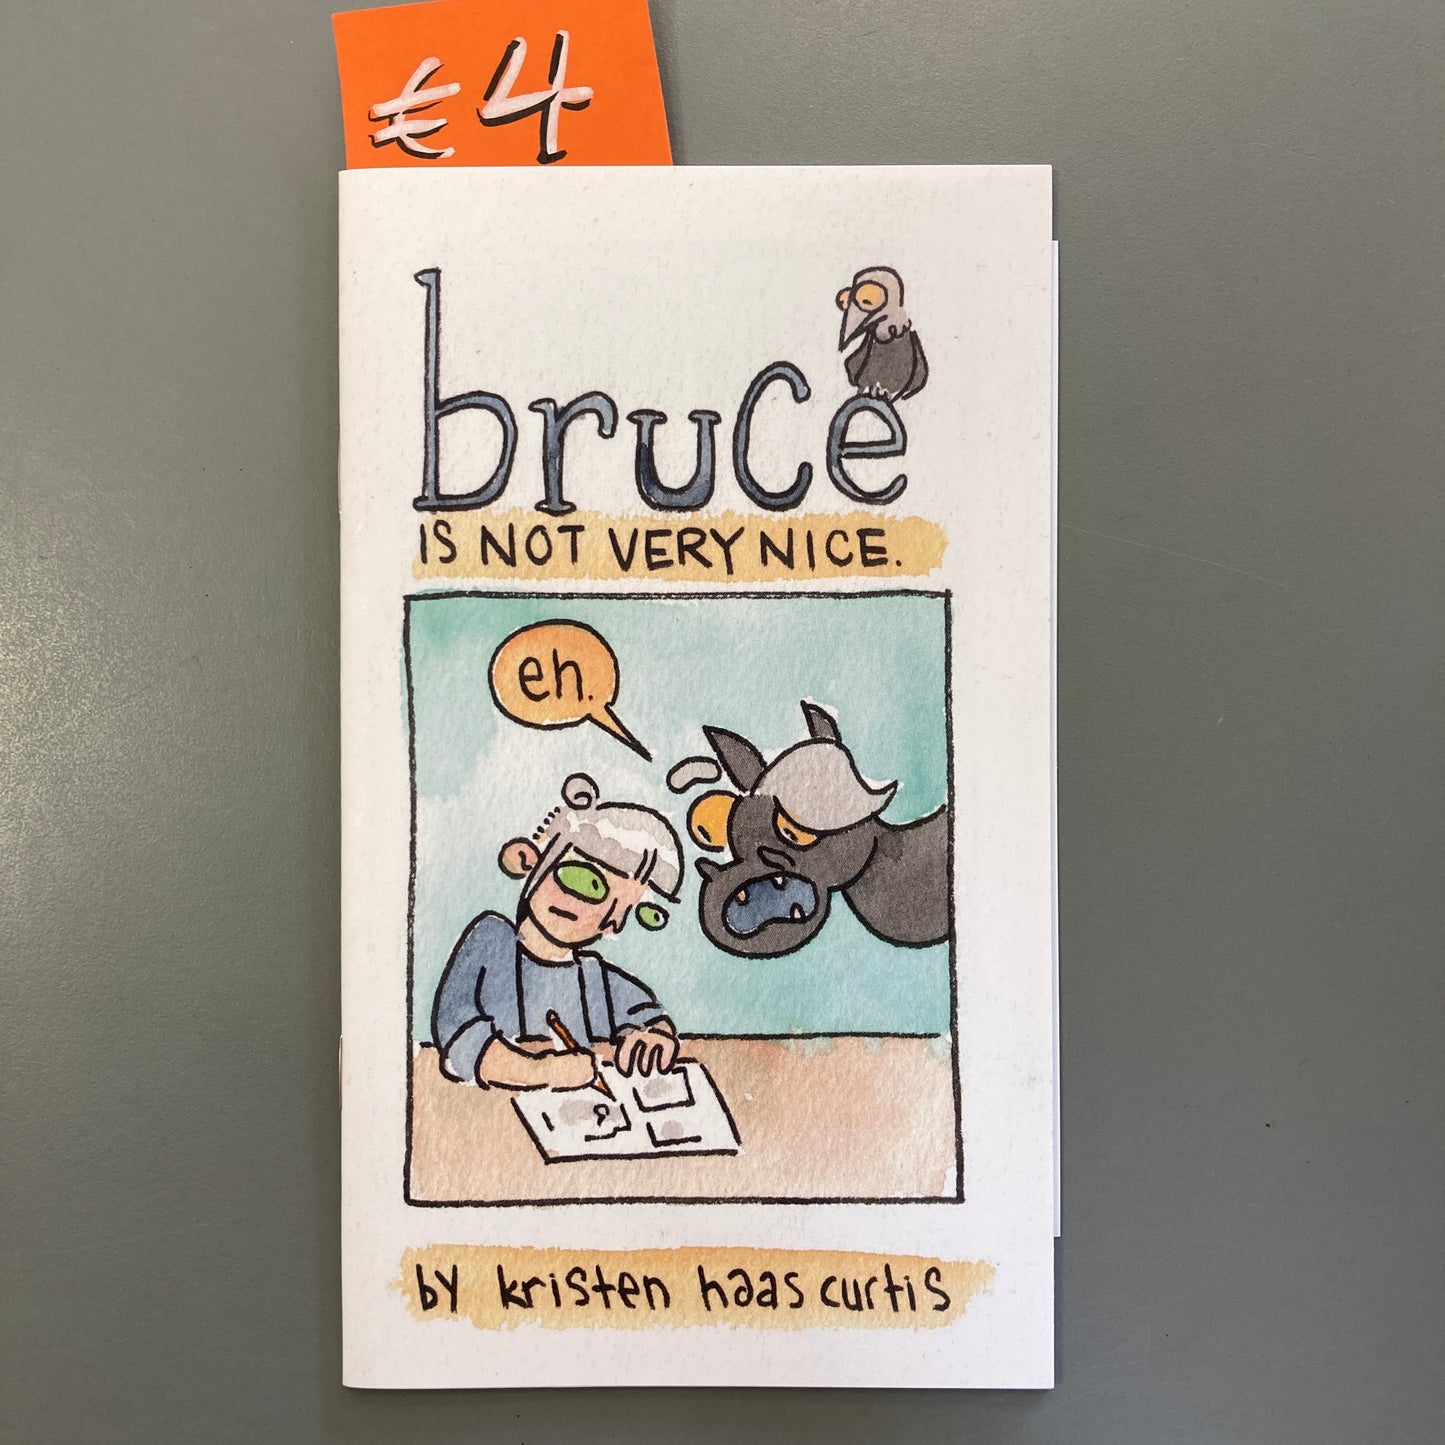 Bruce is Not Very Nice